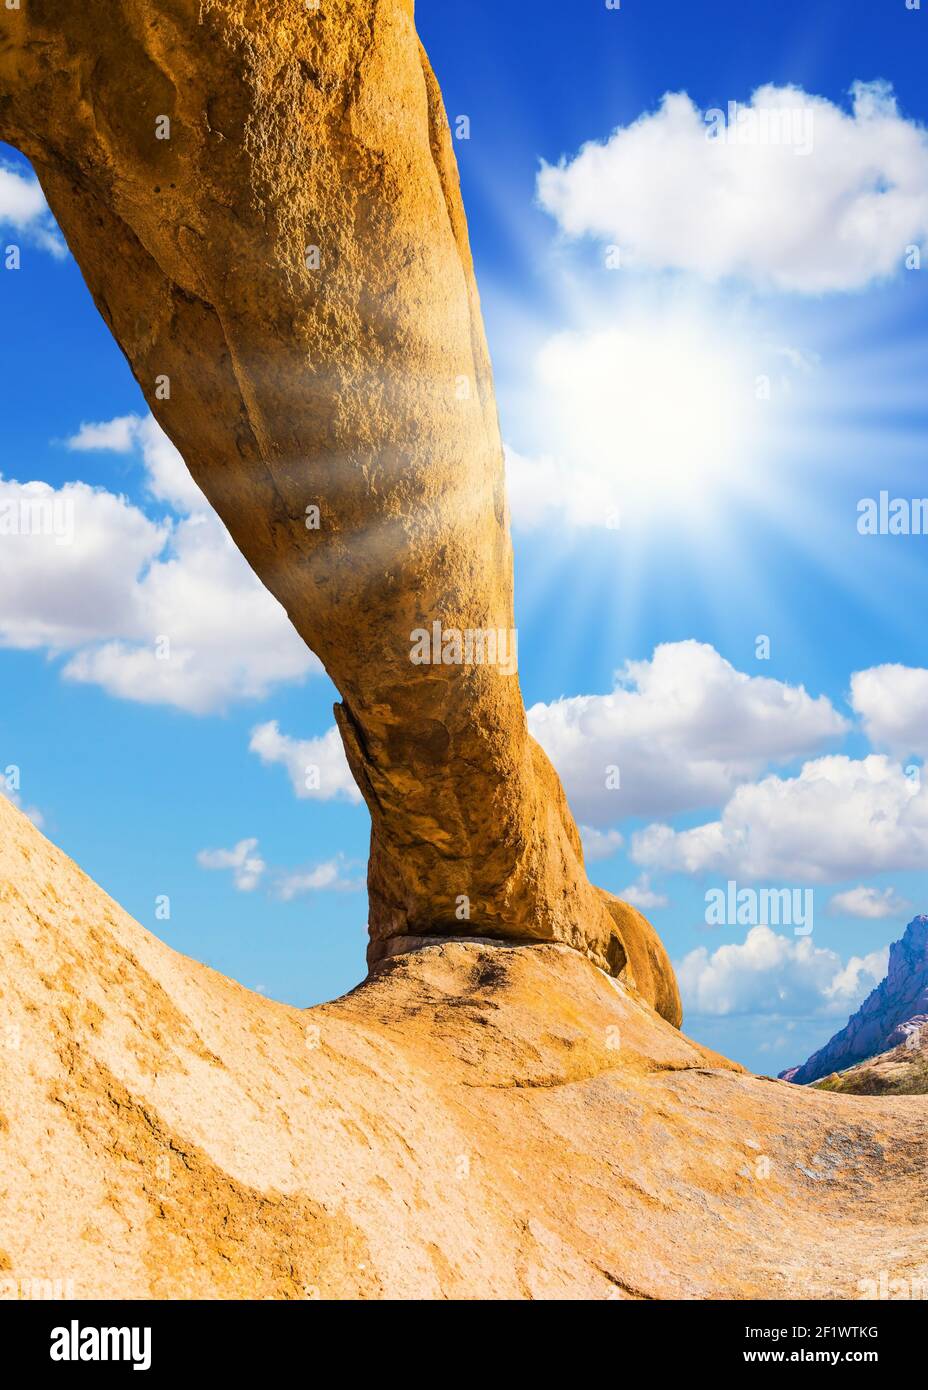 Picturesque stone arches and rocks Stock Photo